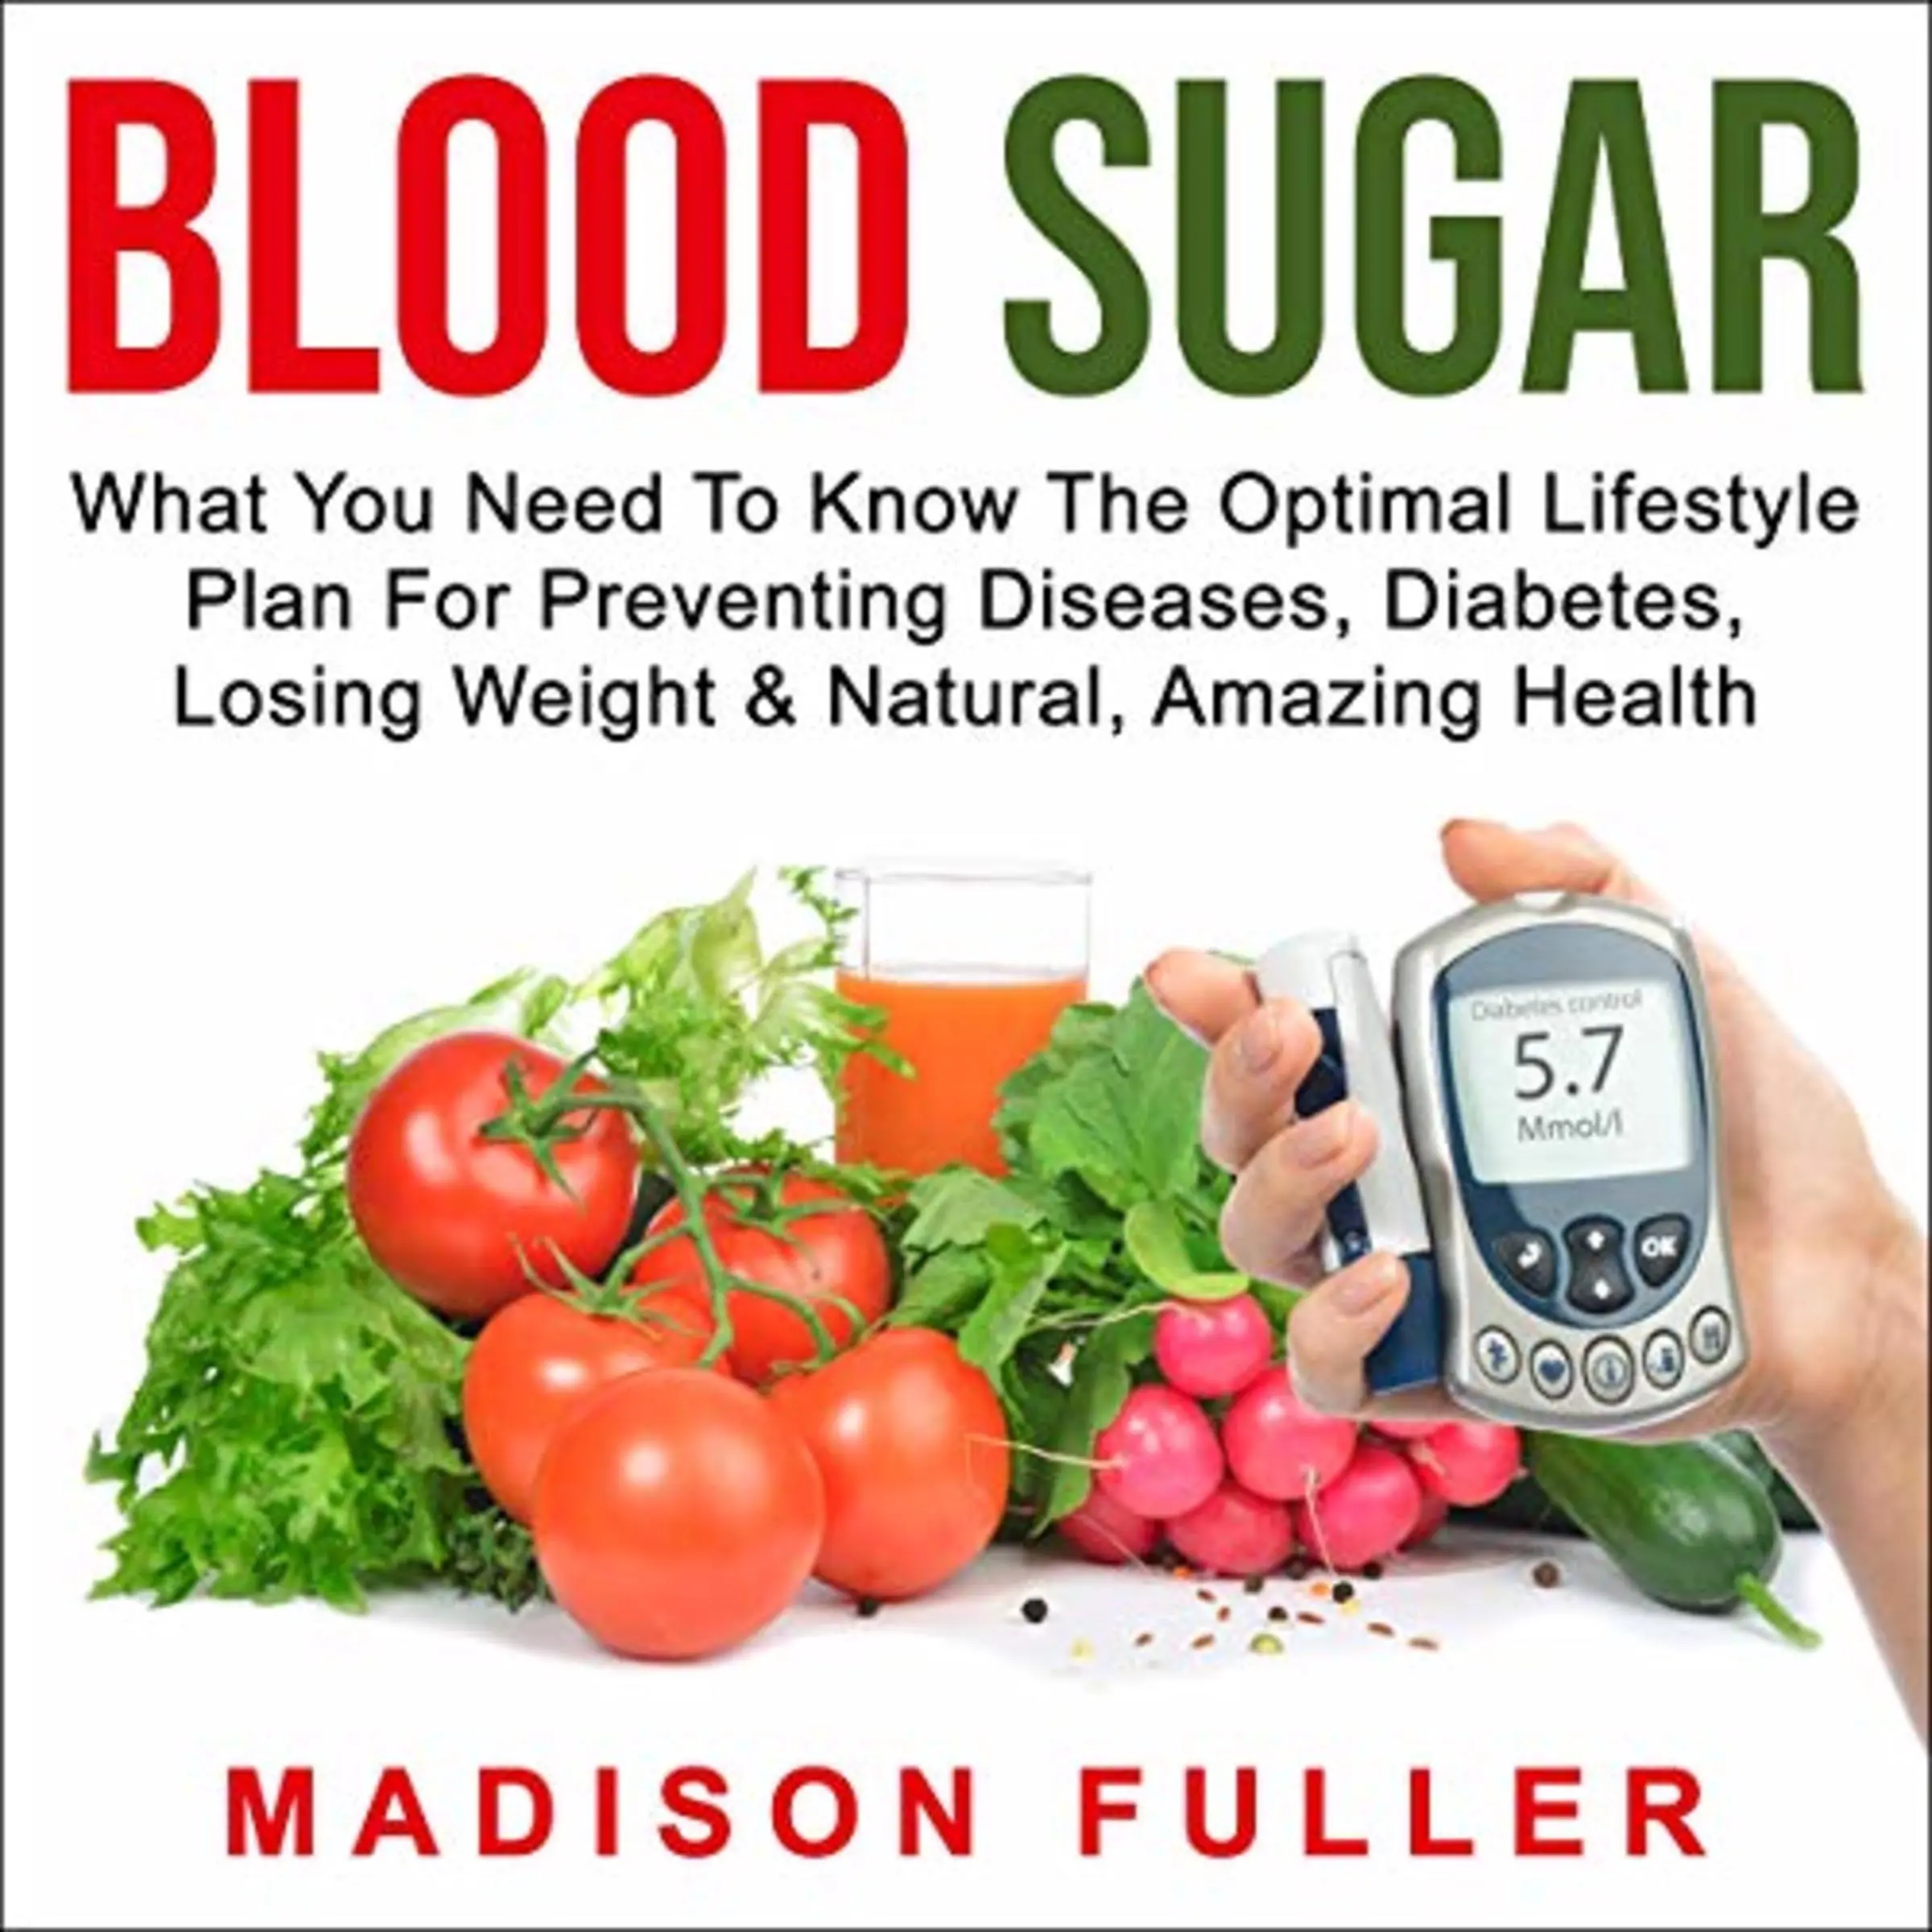 Blood Sugar by Madison Fuller Audiobook